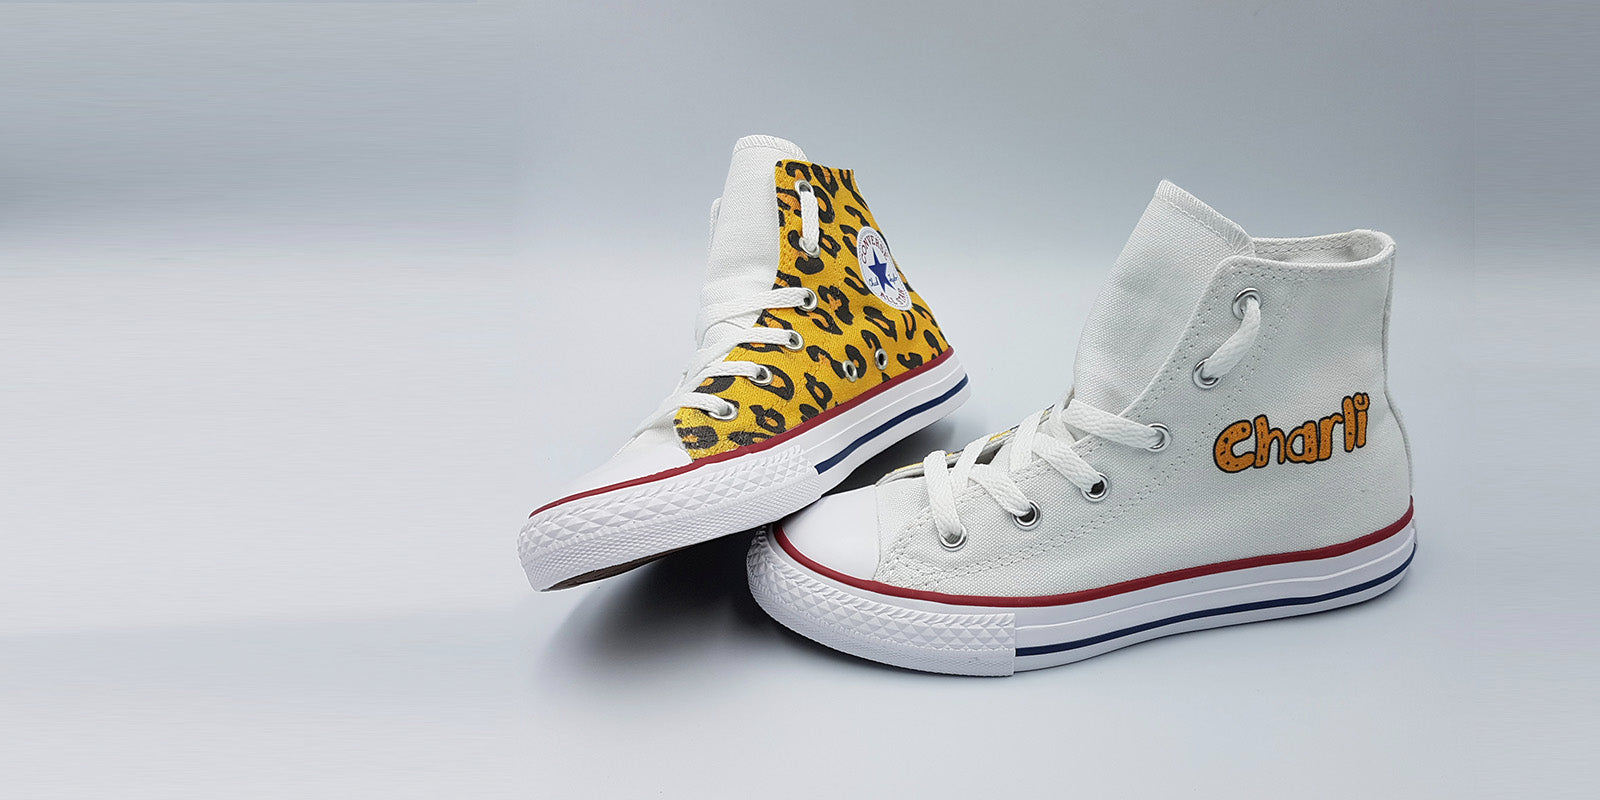 Animal Print Shoes - Personalised Converse Tagged "fix"